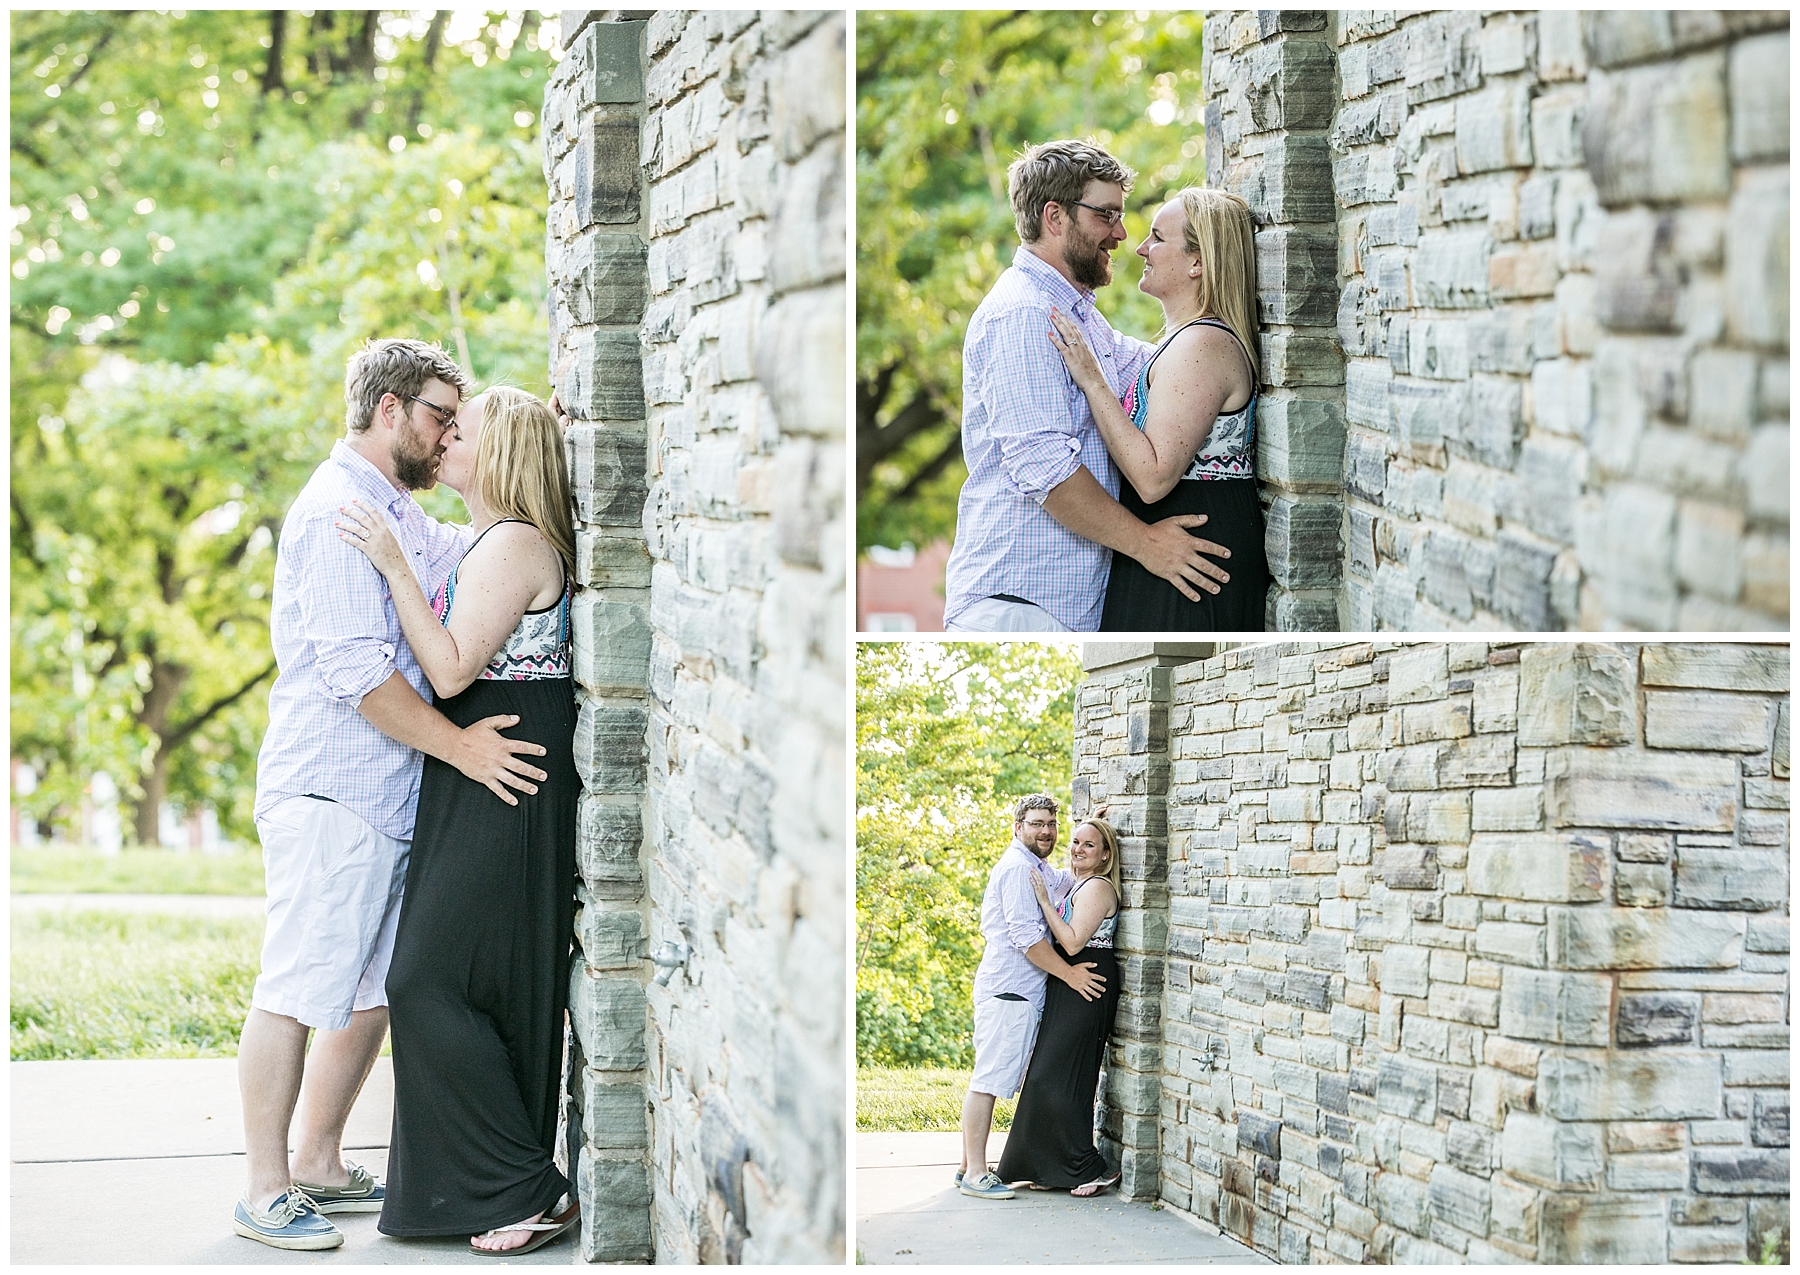 Tess Ray Camden Yards Engagement Session Living Radiant Photography photos_0047.jpg